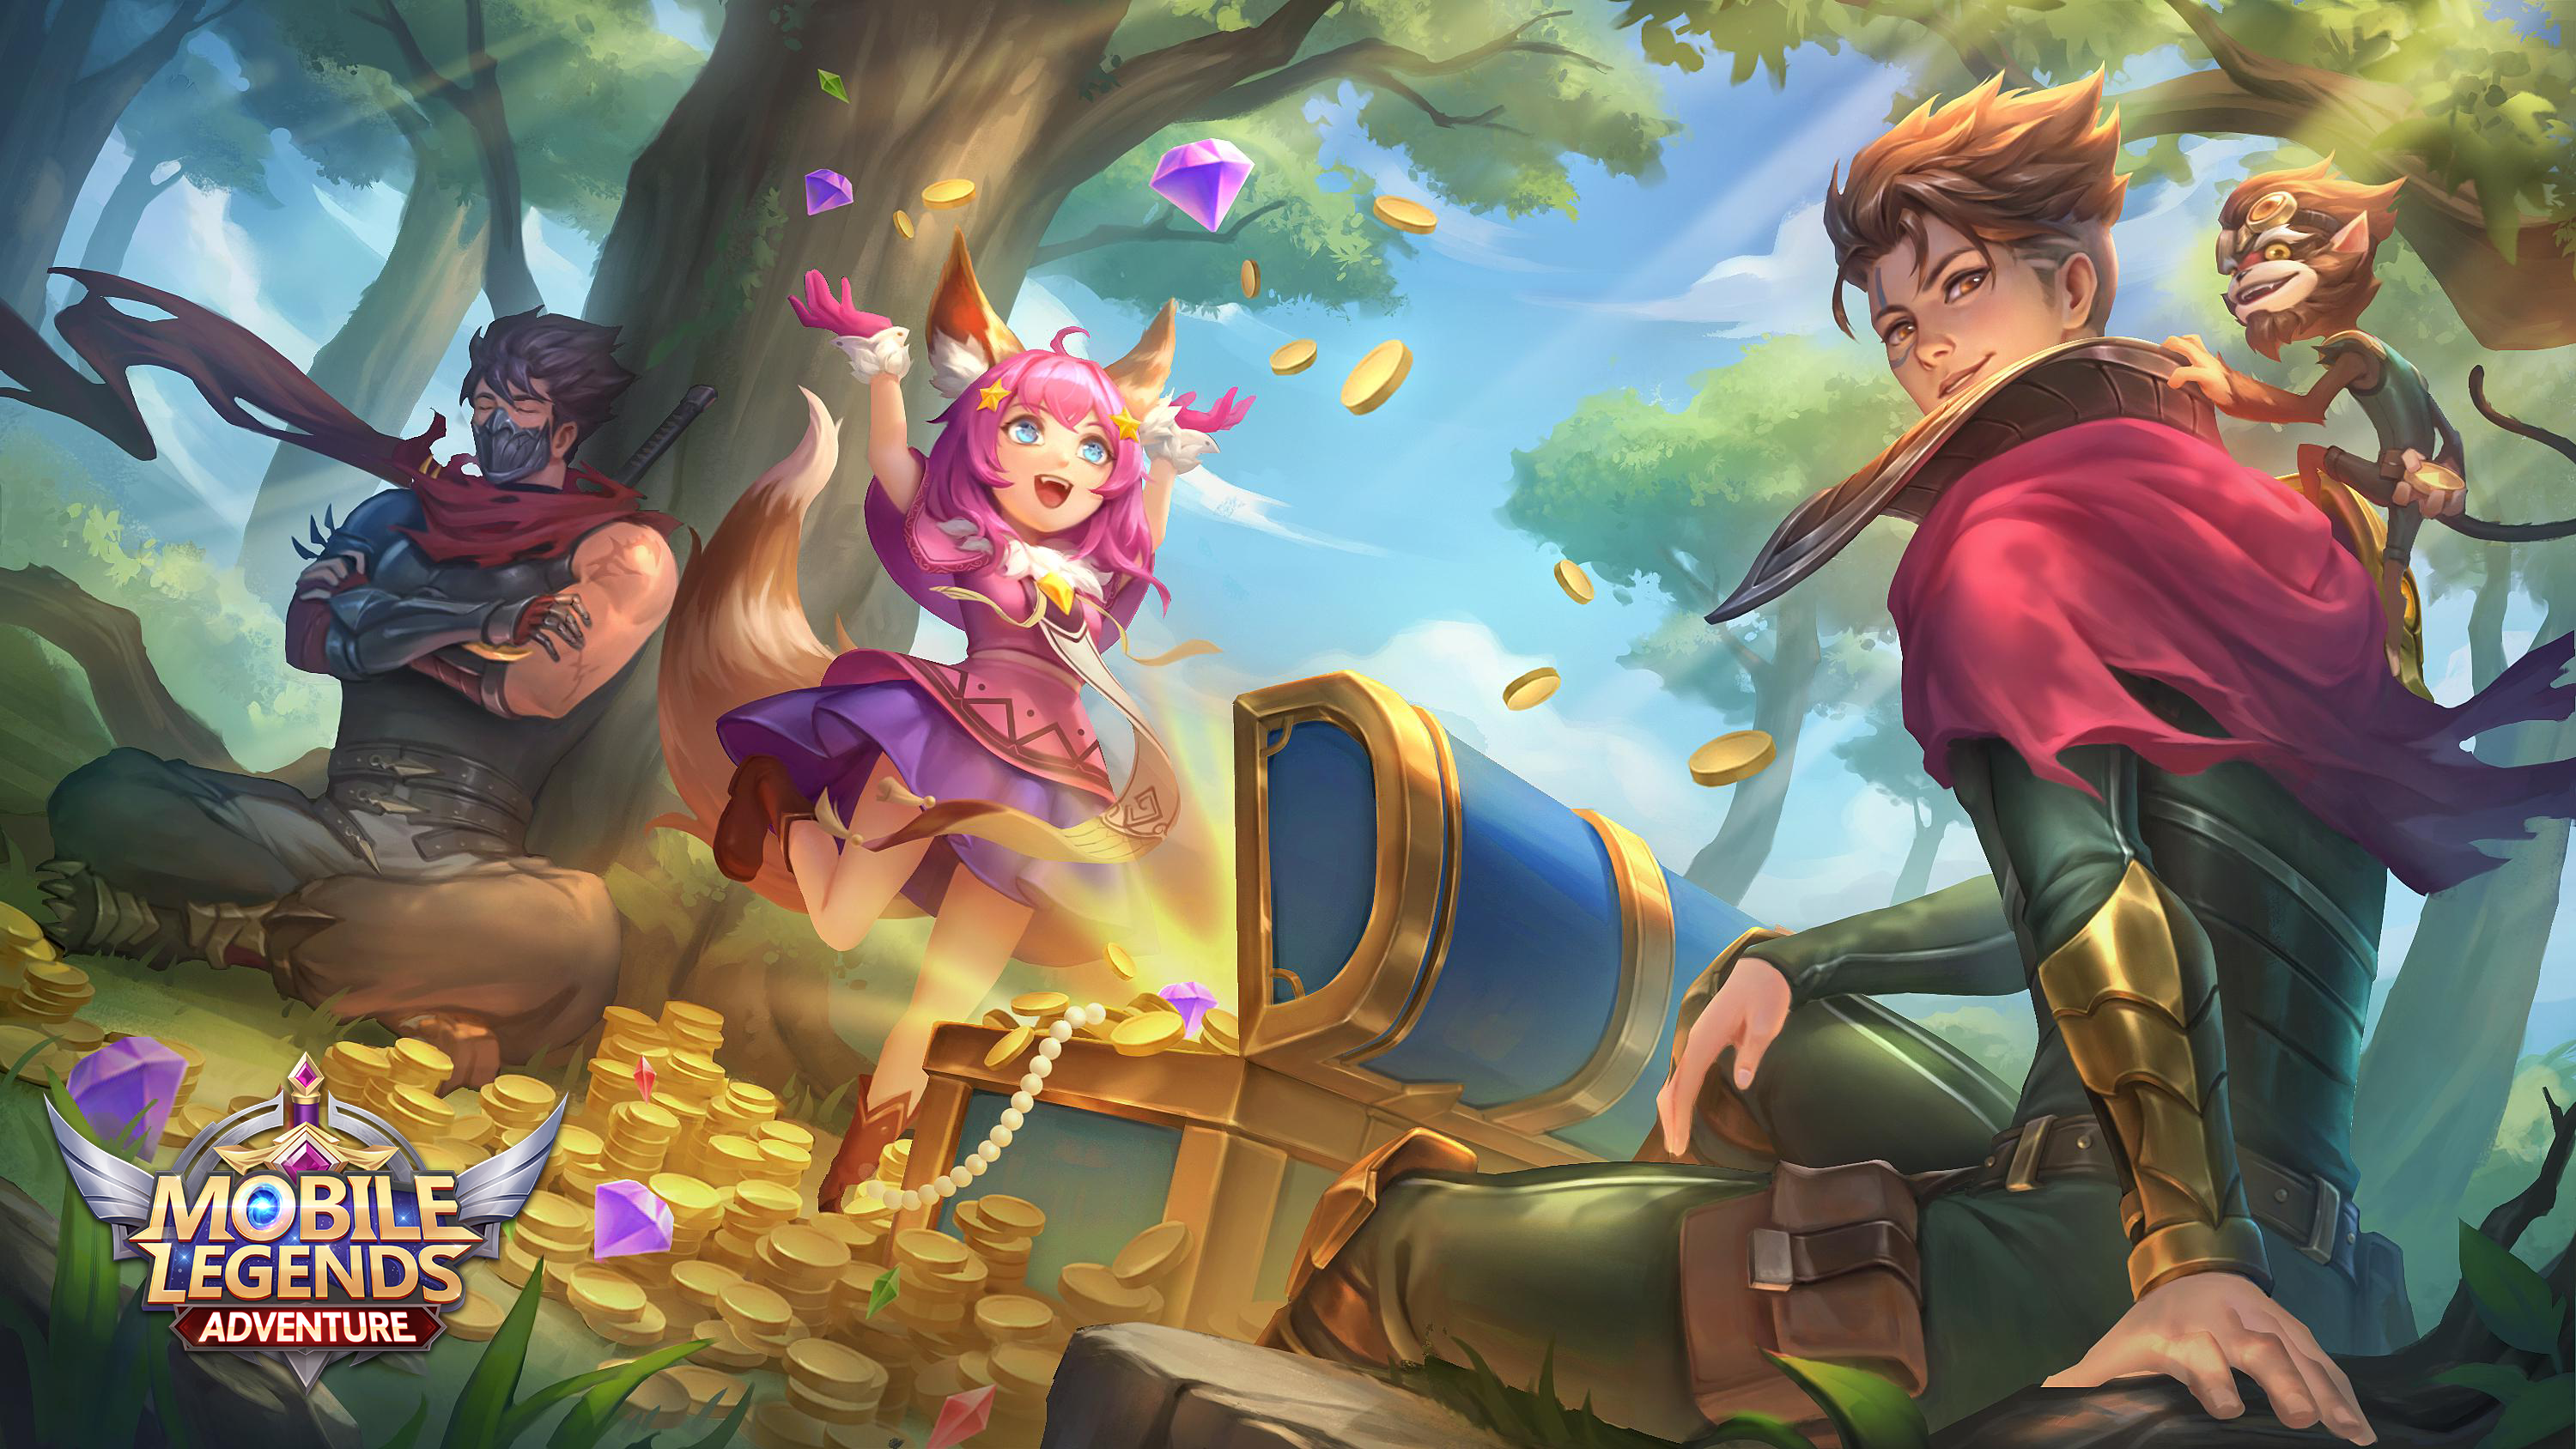 Things to know about the Mobile Legends: Adventure New Era Event